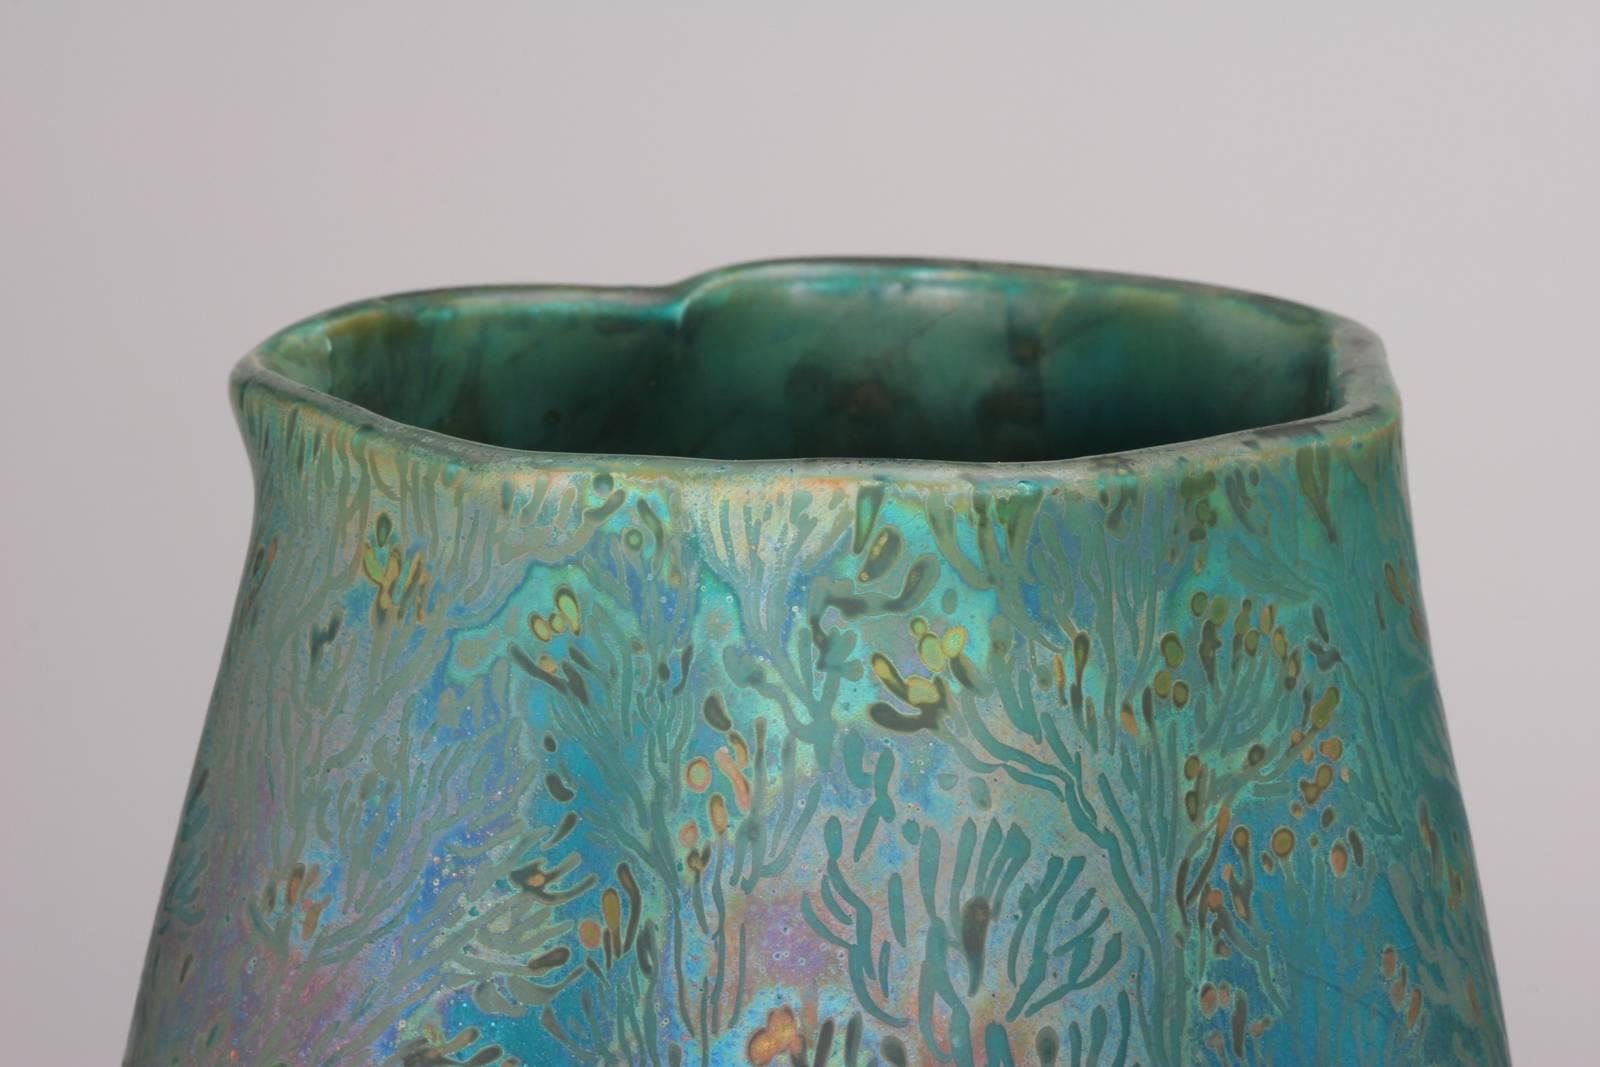 Photography does not do justice to the complexity of the glaze on this remarkable ceramic masterpiece. The luster varies from Persian turquoise to pink, red, green, gold and every tone in between. An active world of shrimp, seaweed and other sea